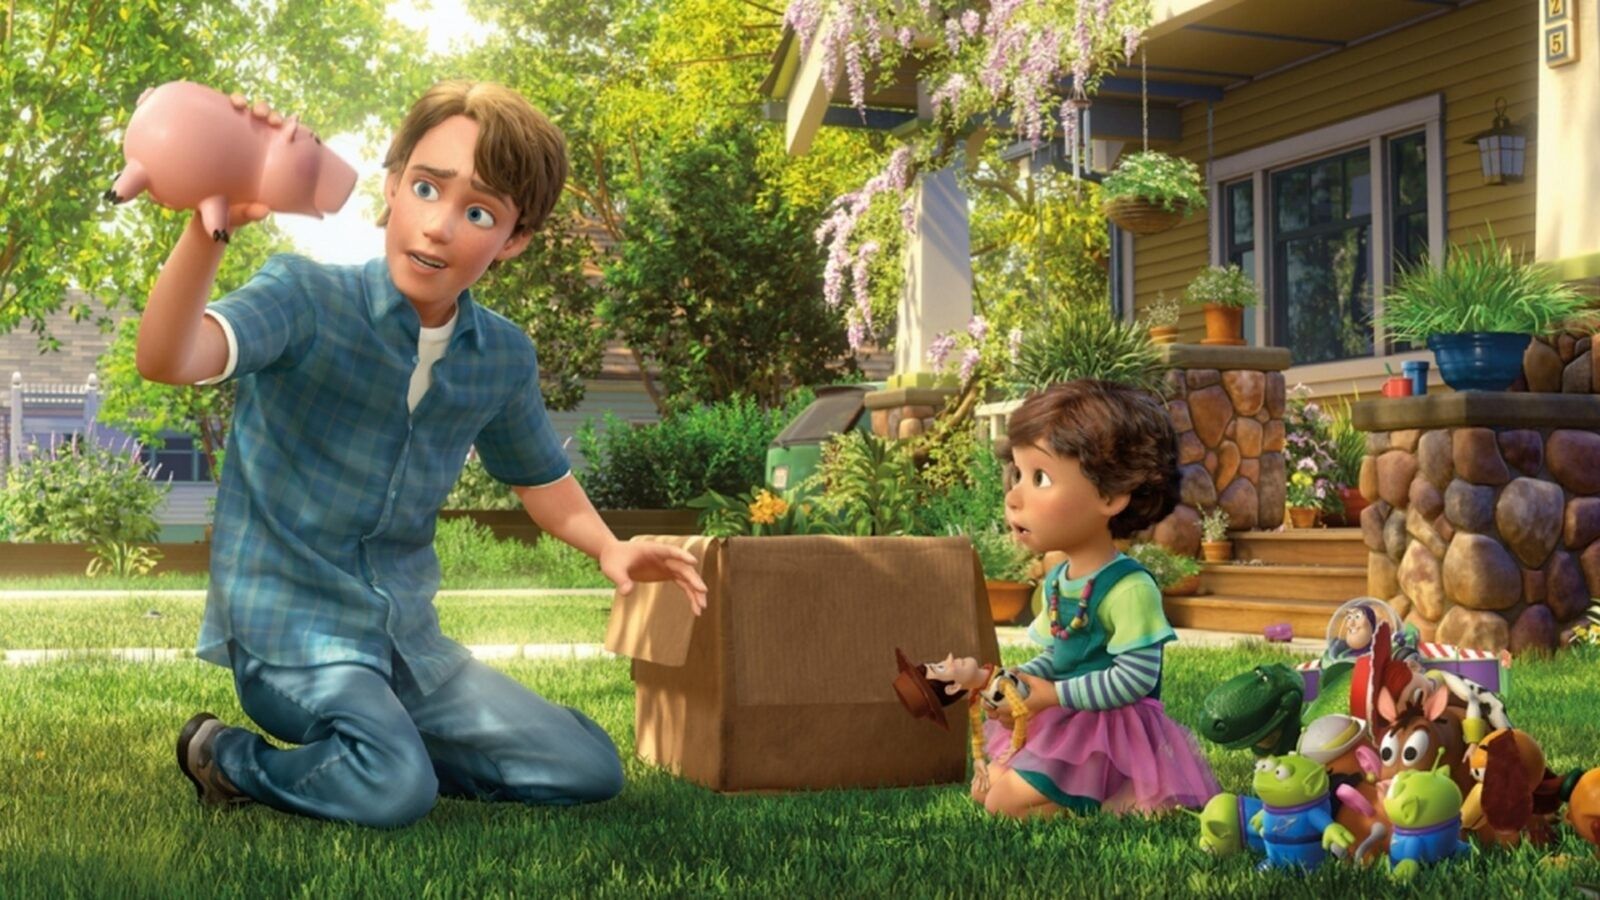 Bonnie and Andy (Toy Story 3)